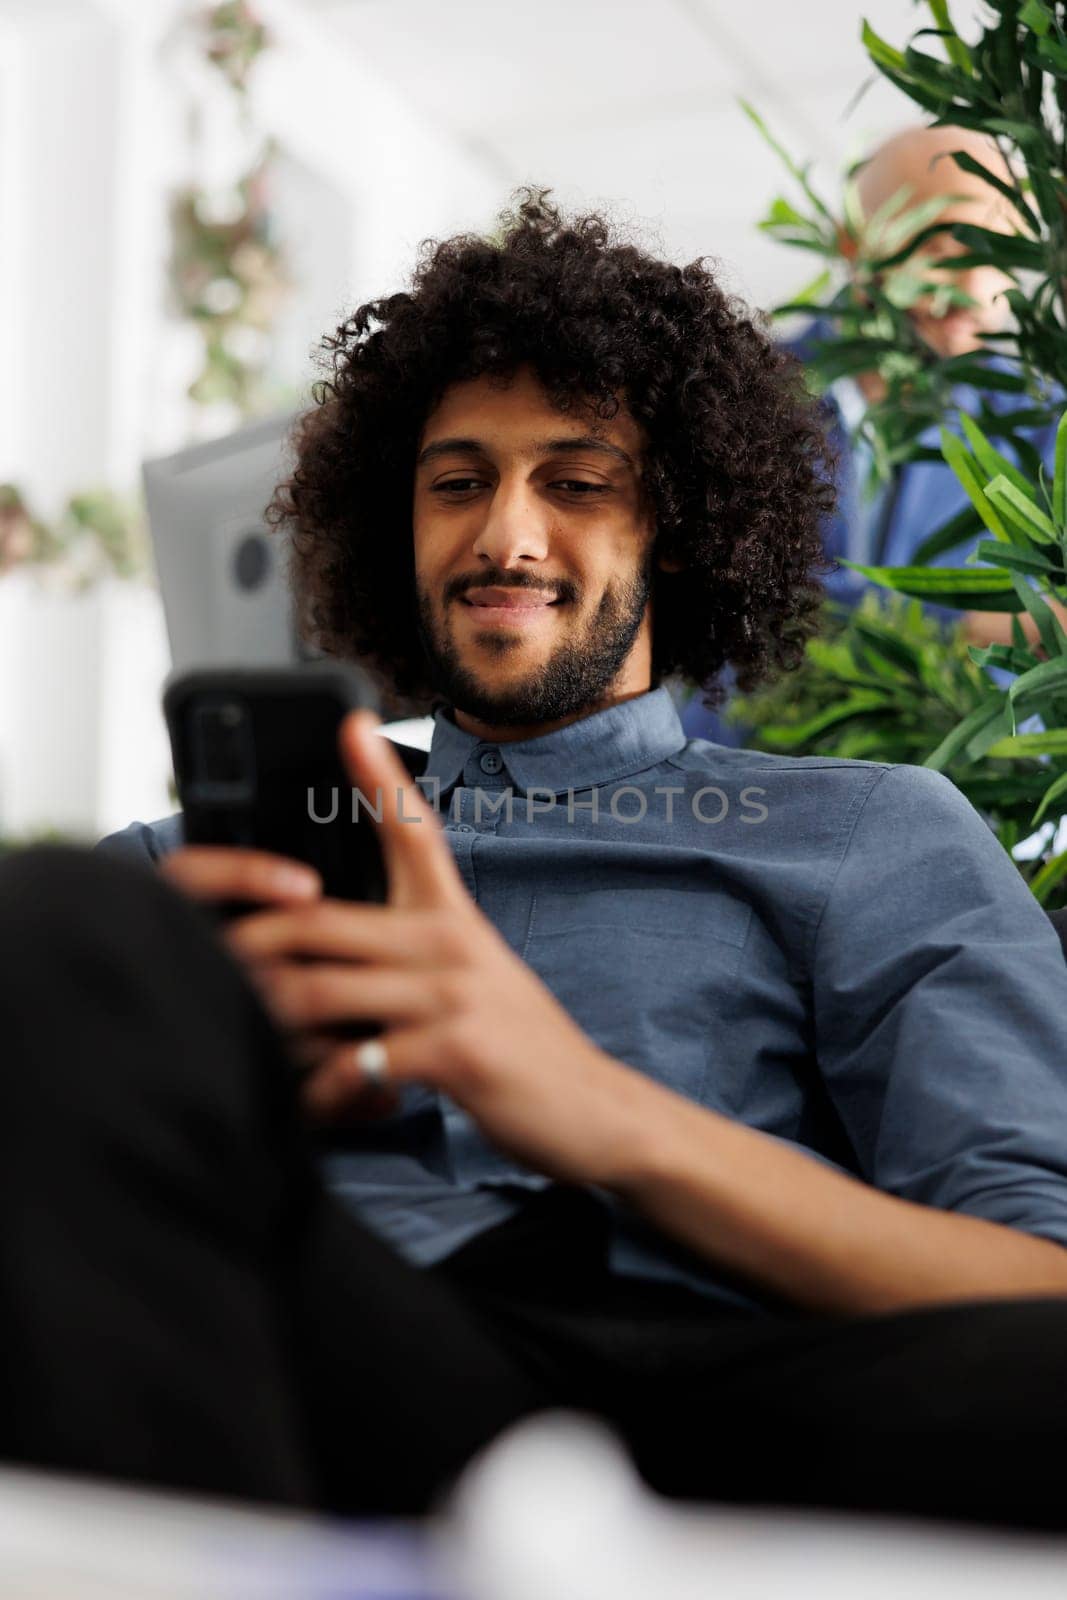 Smiling arab executive manager texting in social network on smartphone in business office. Start up company employee chatting on mobile phone while sitting on couch in coworking space